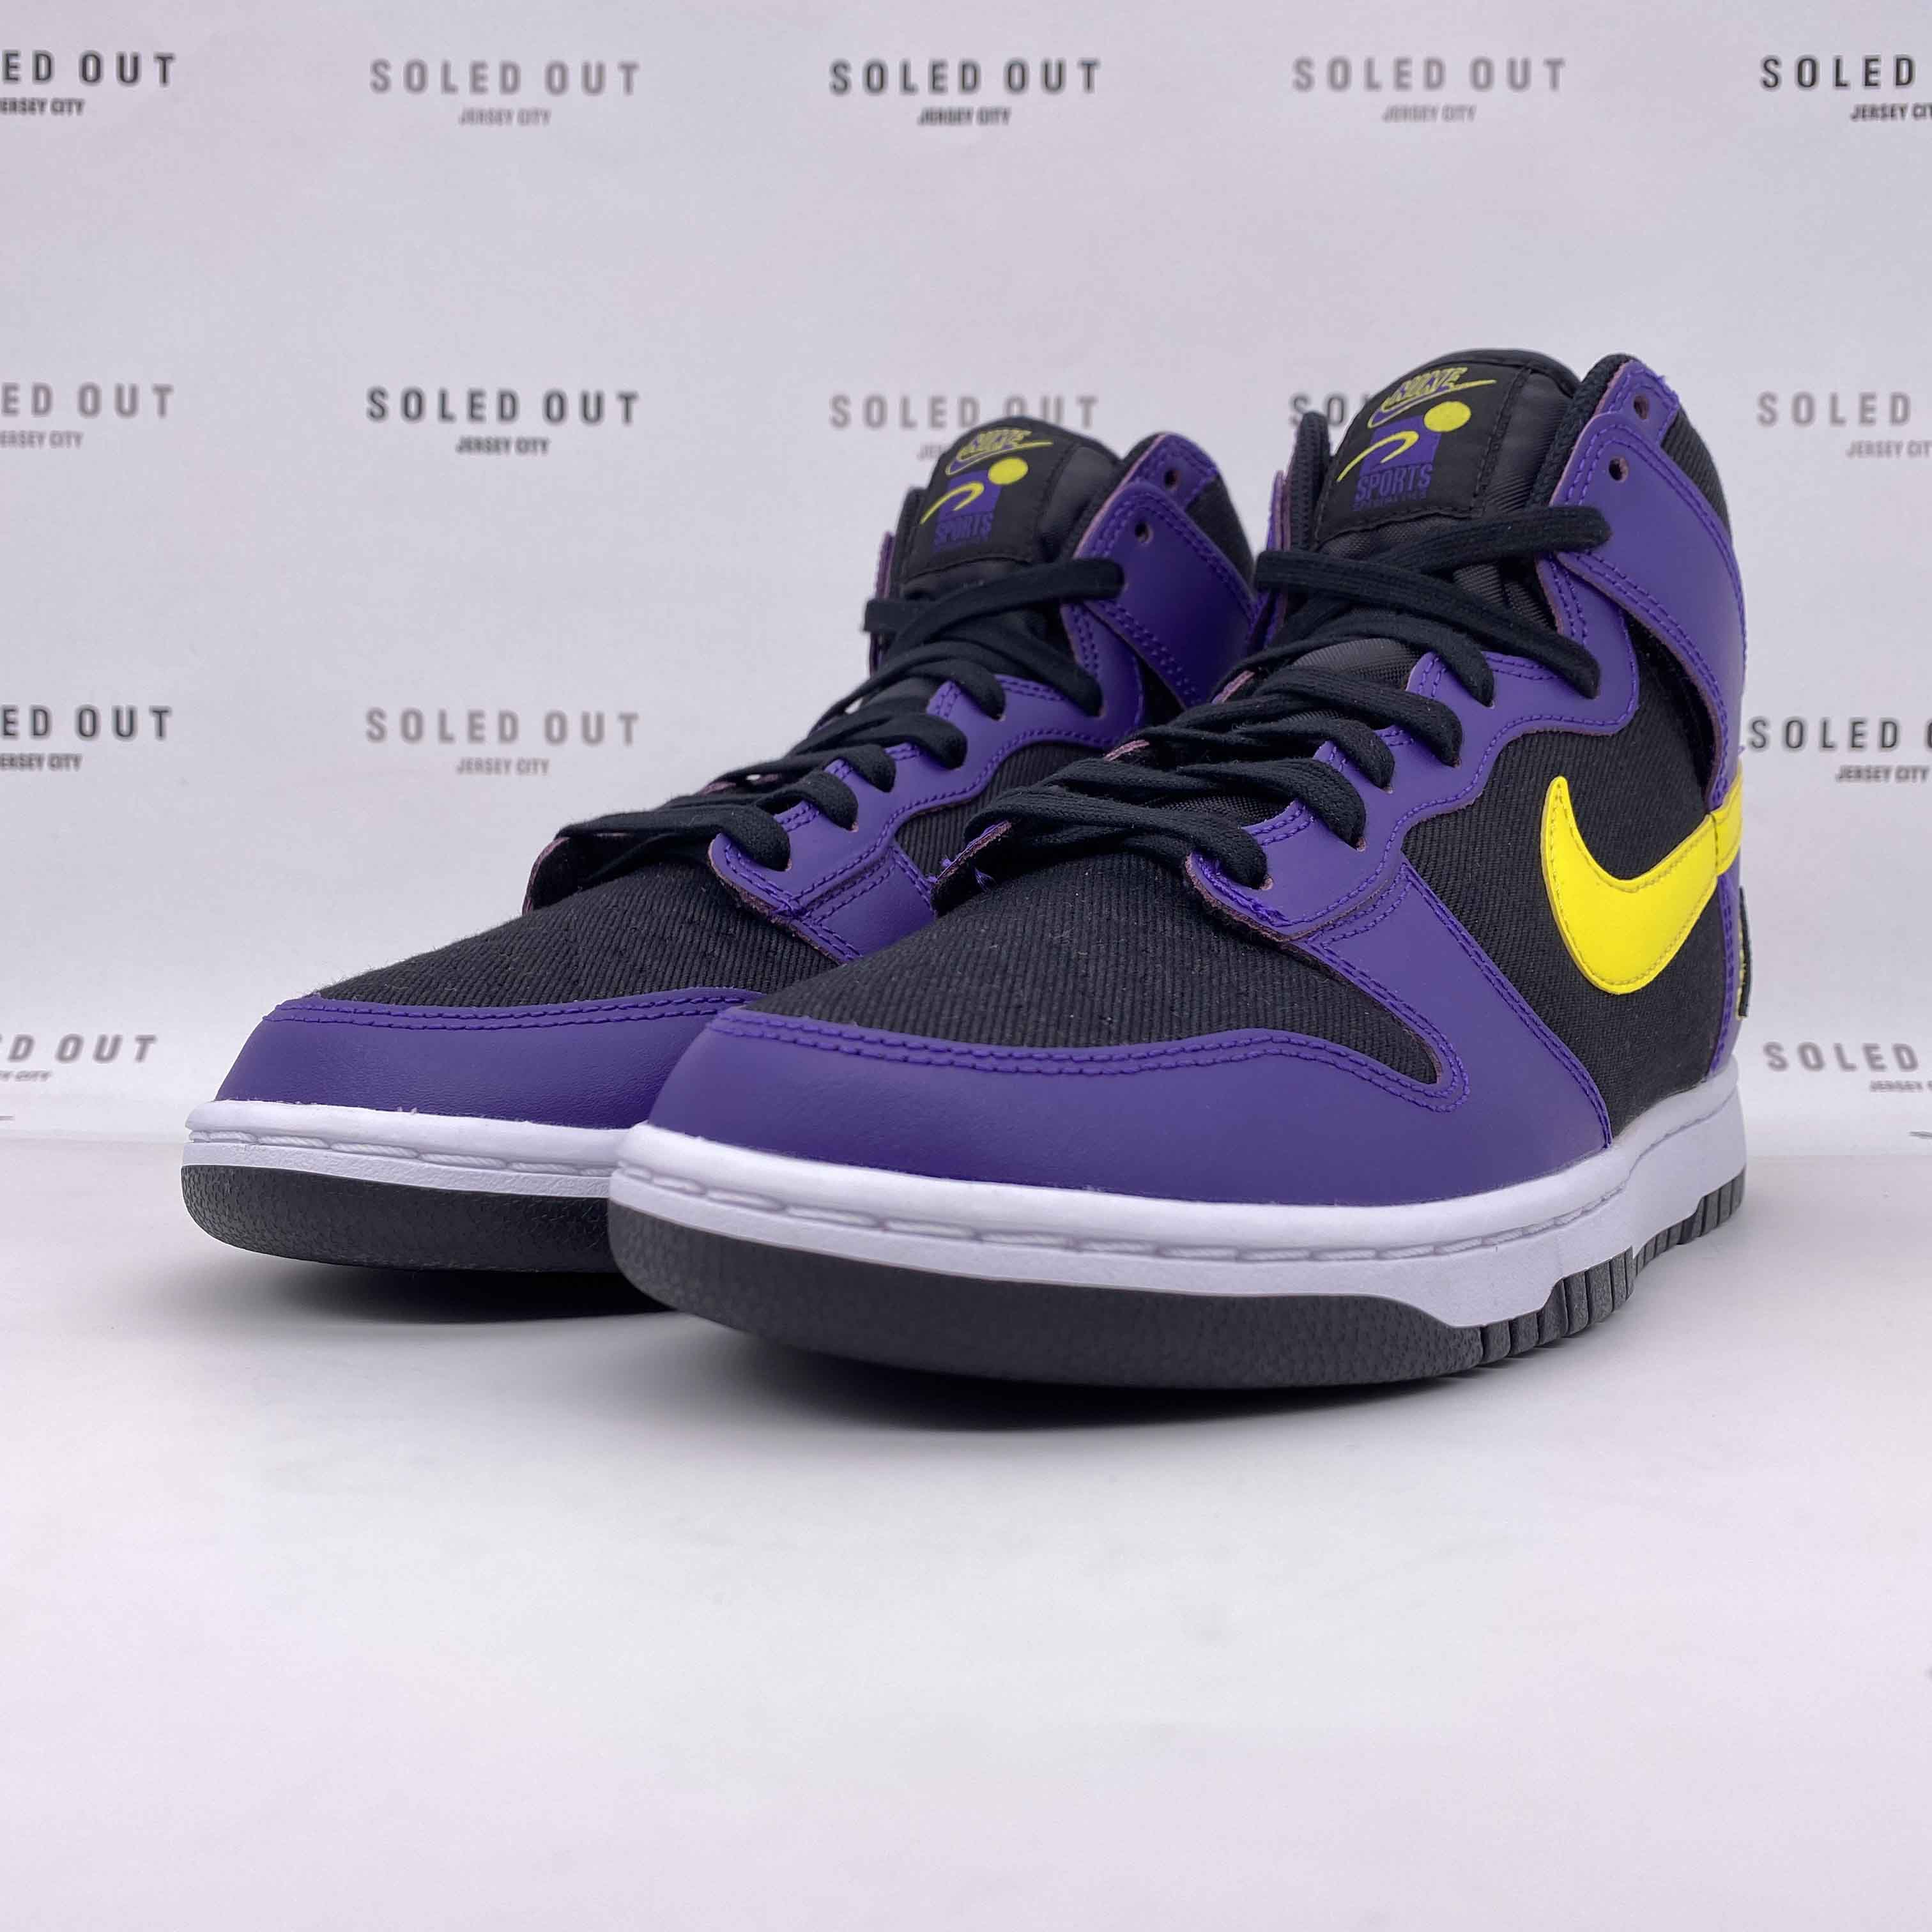 Nike Dunk High PRM "Lakers" 2021 New Size 10